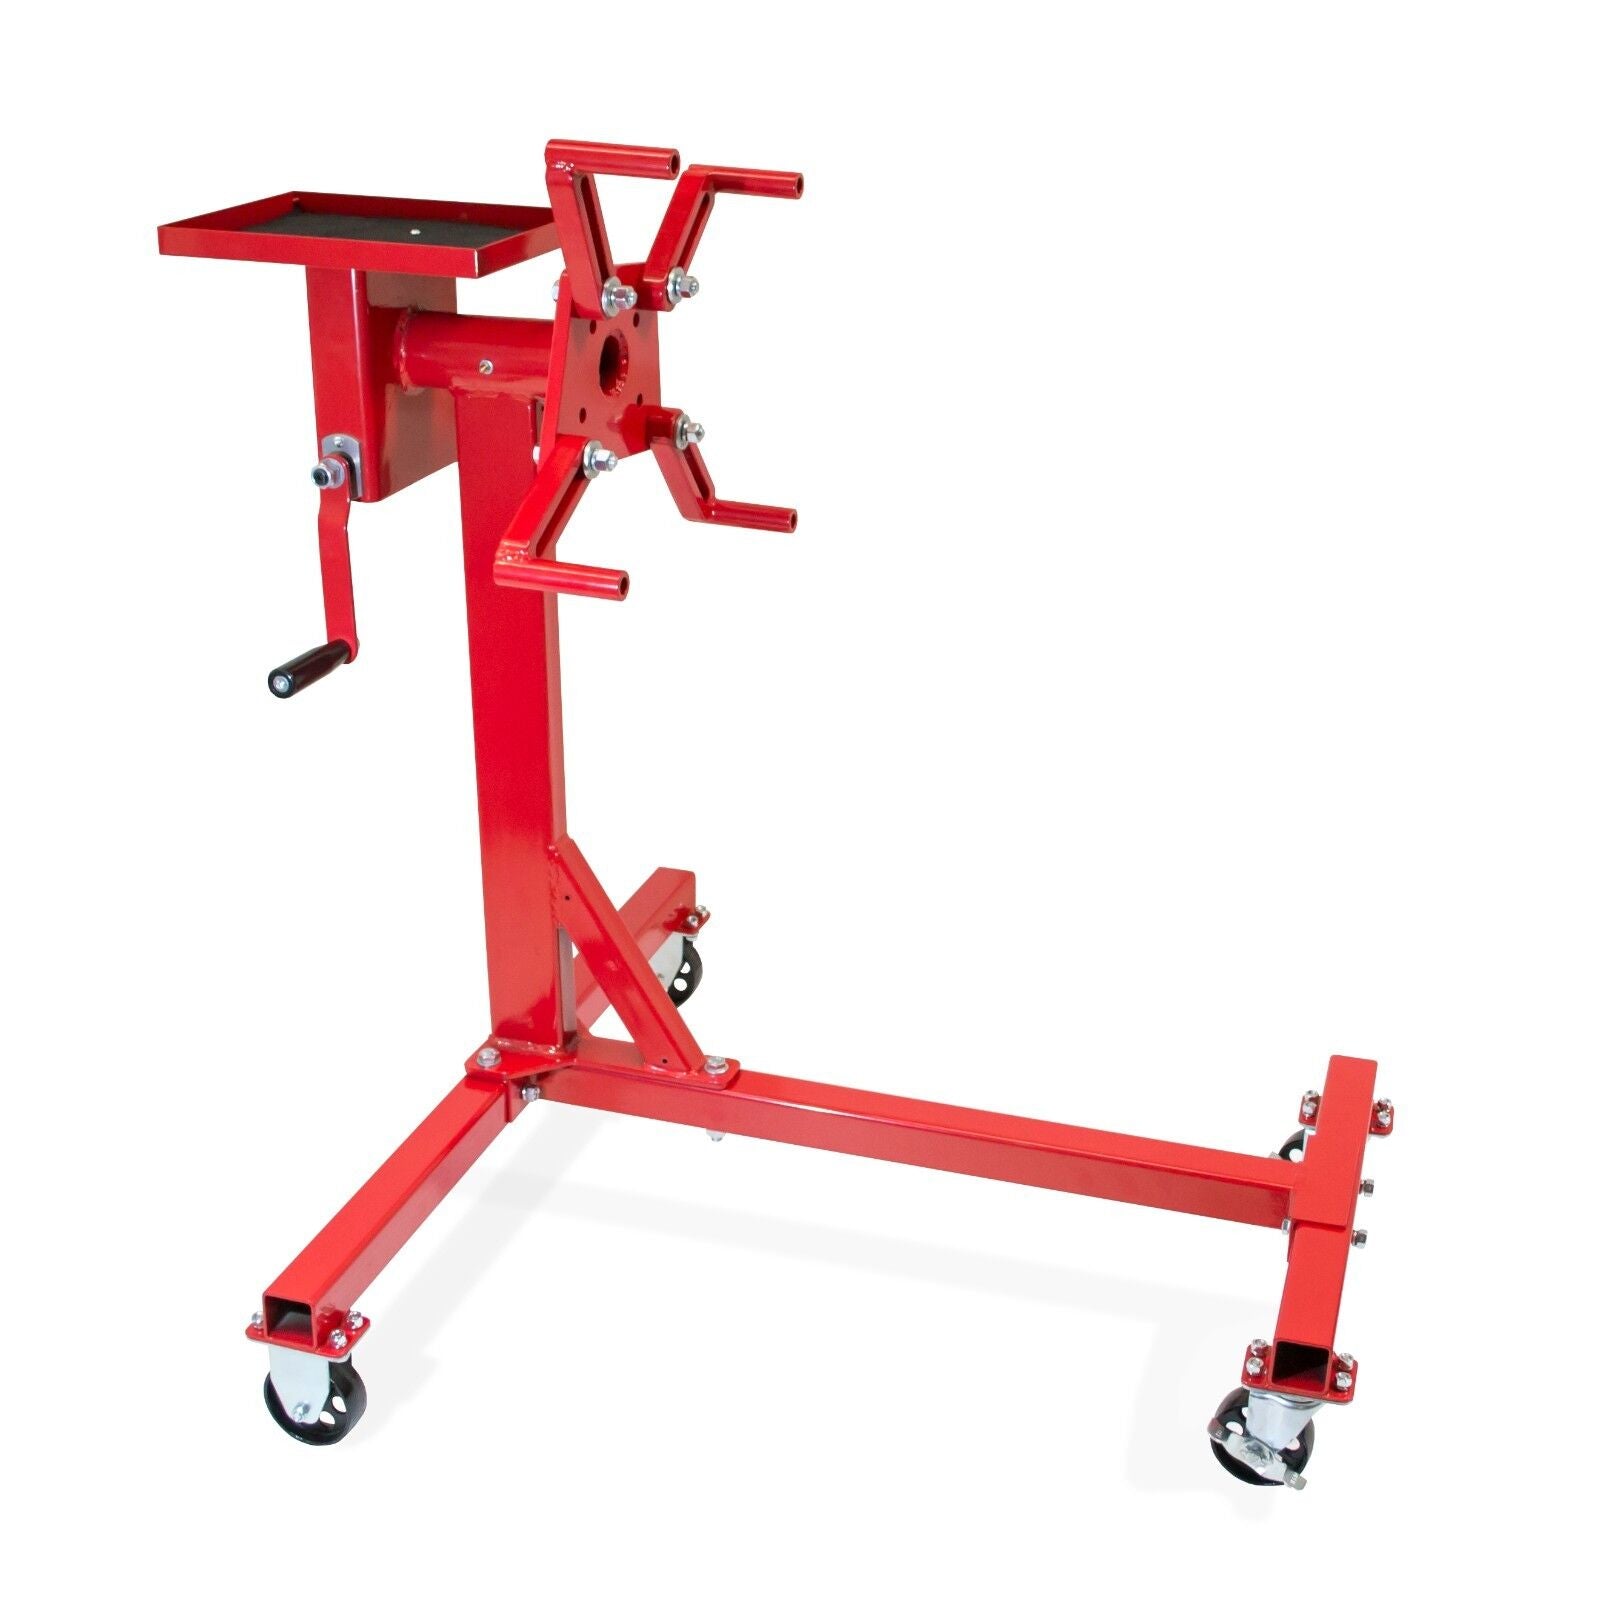 Jackco 1000 lb. Capacity Rotating Engine Stand with Tool Tray - Tool Guy Republic